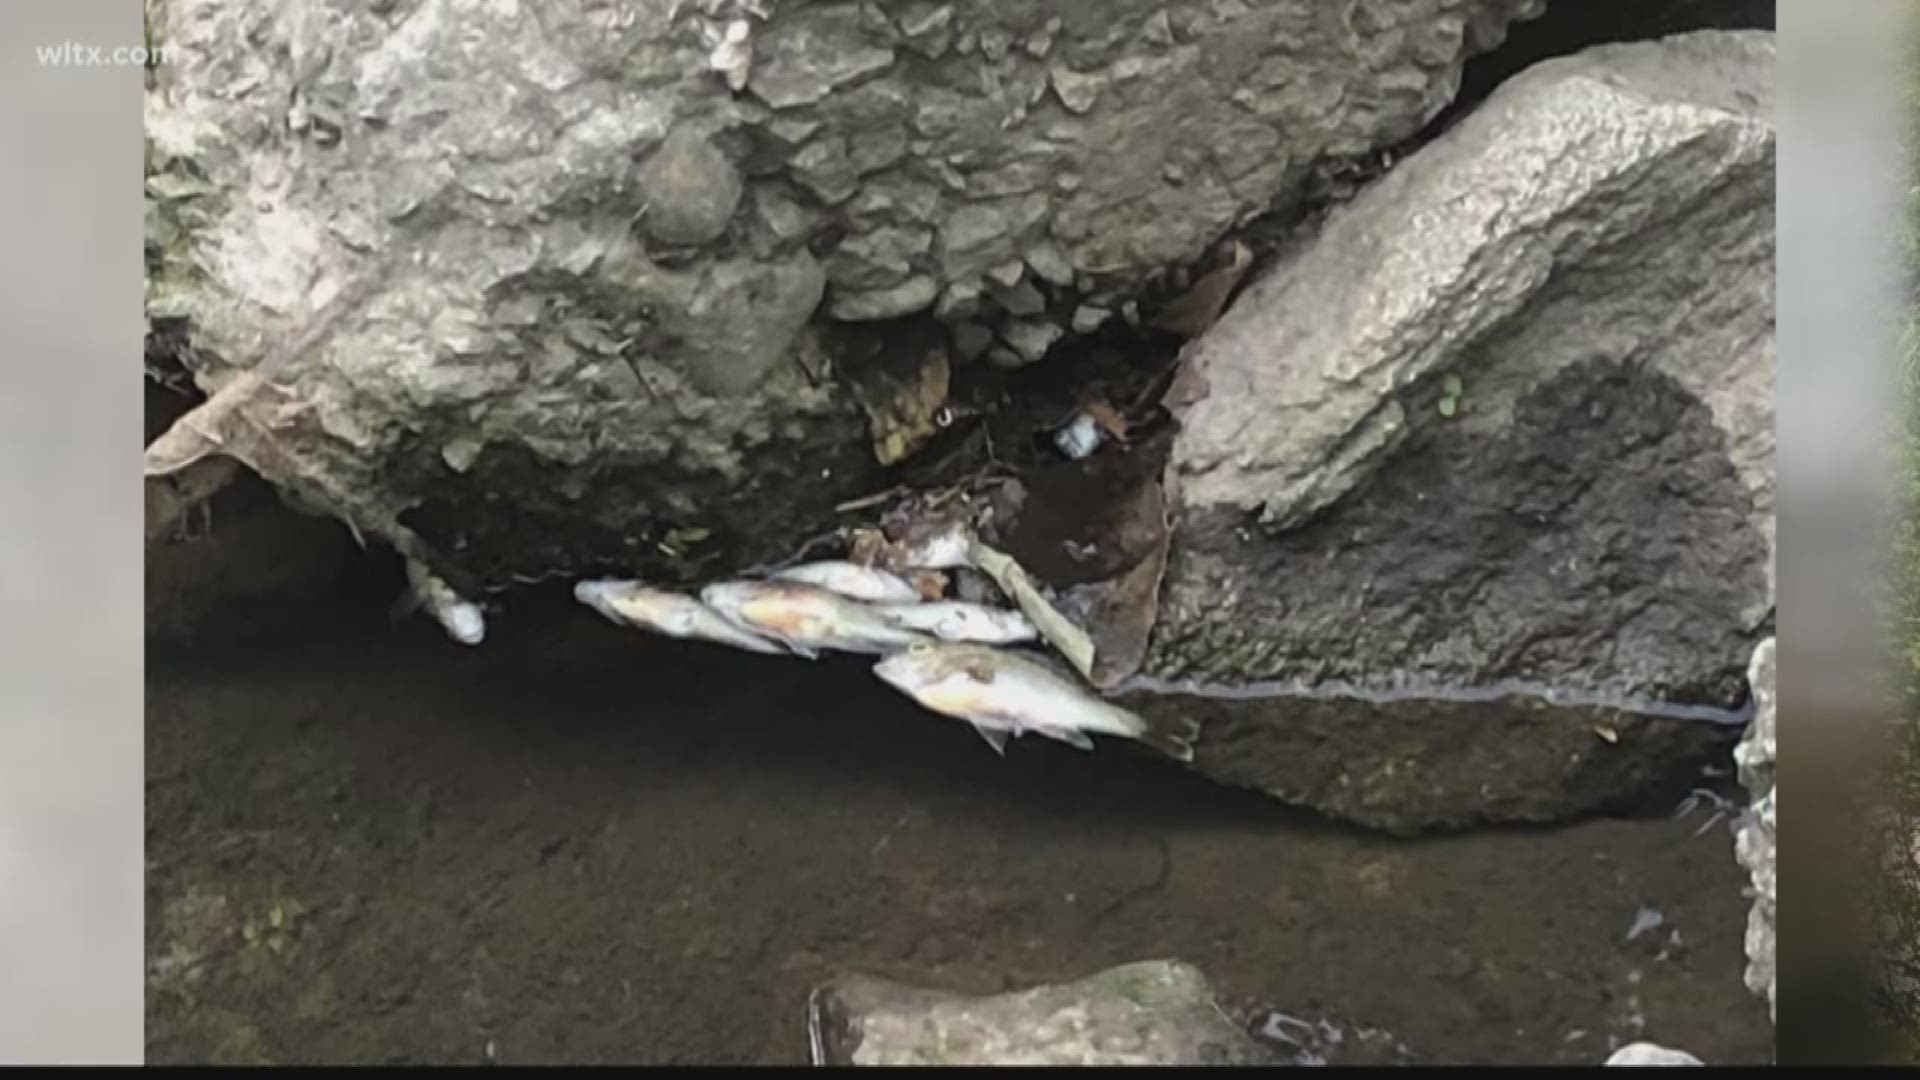 An incident occurred near Olympia Park that killed hundreds of fish